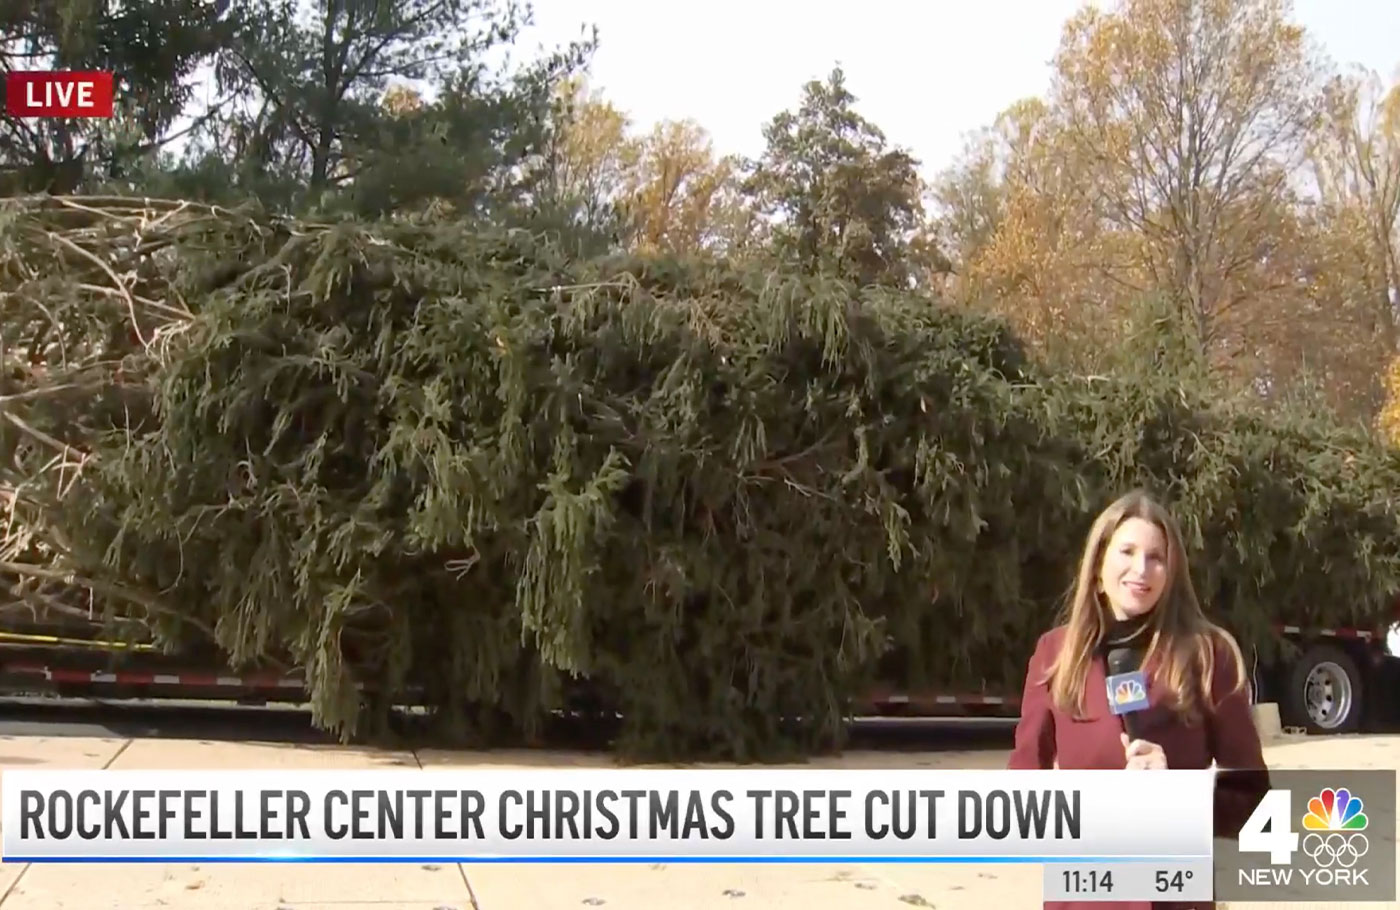 First They Said ‘No Way’ — Now Rock Center Tree Donated by Md. Family Heads for NYC